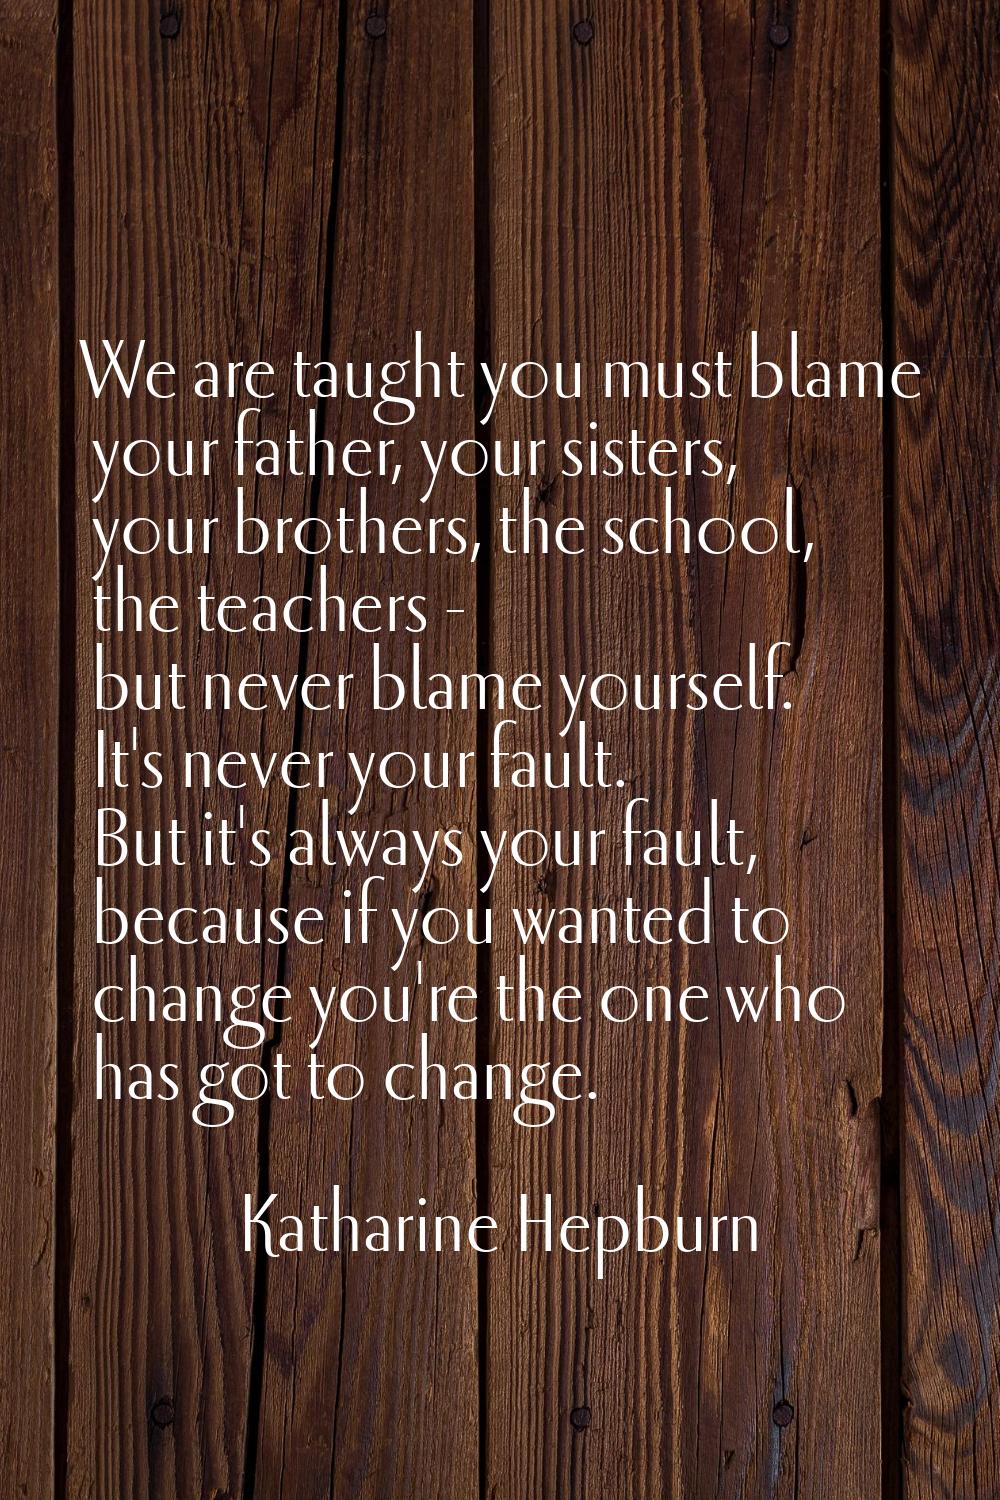 We are taught you must blame your father, your sisters, your brothers, the school, the teachers - b